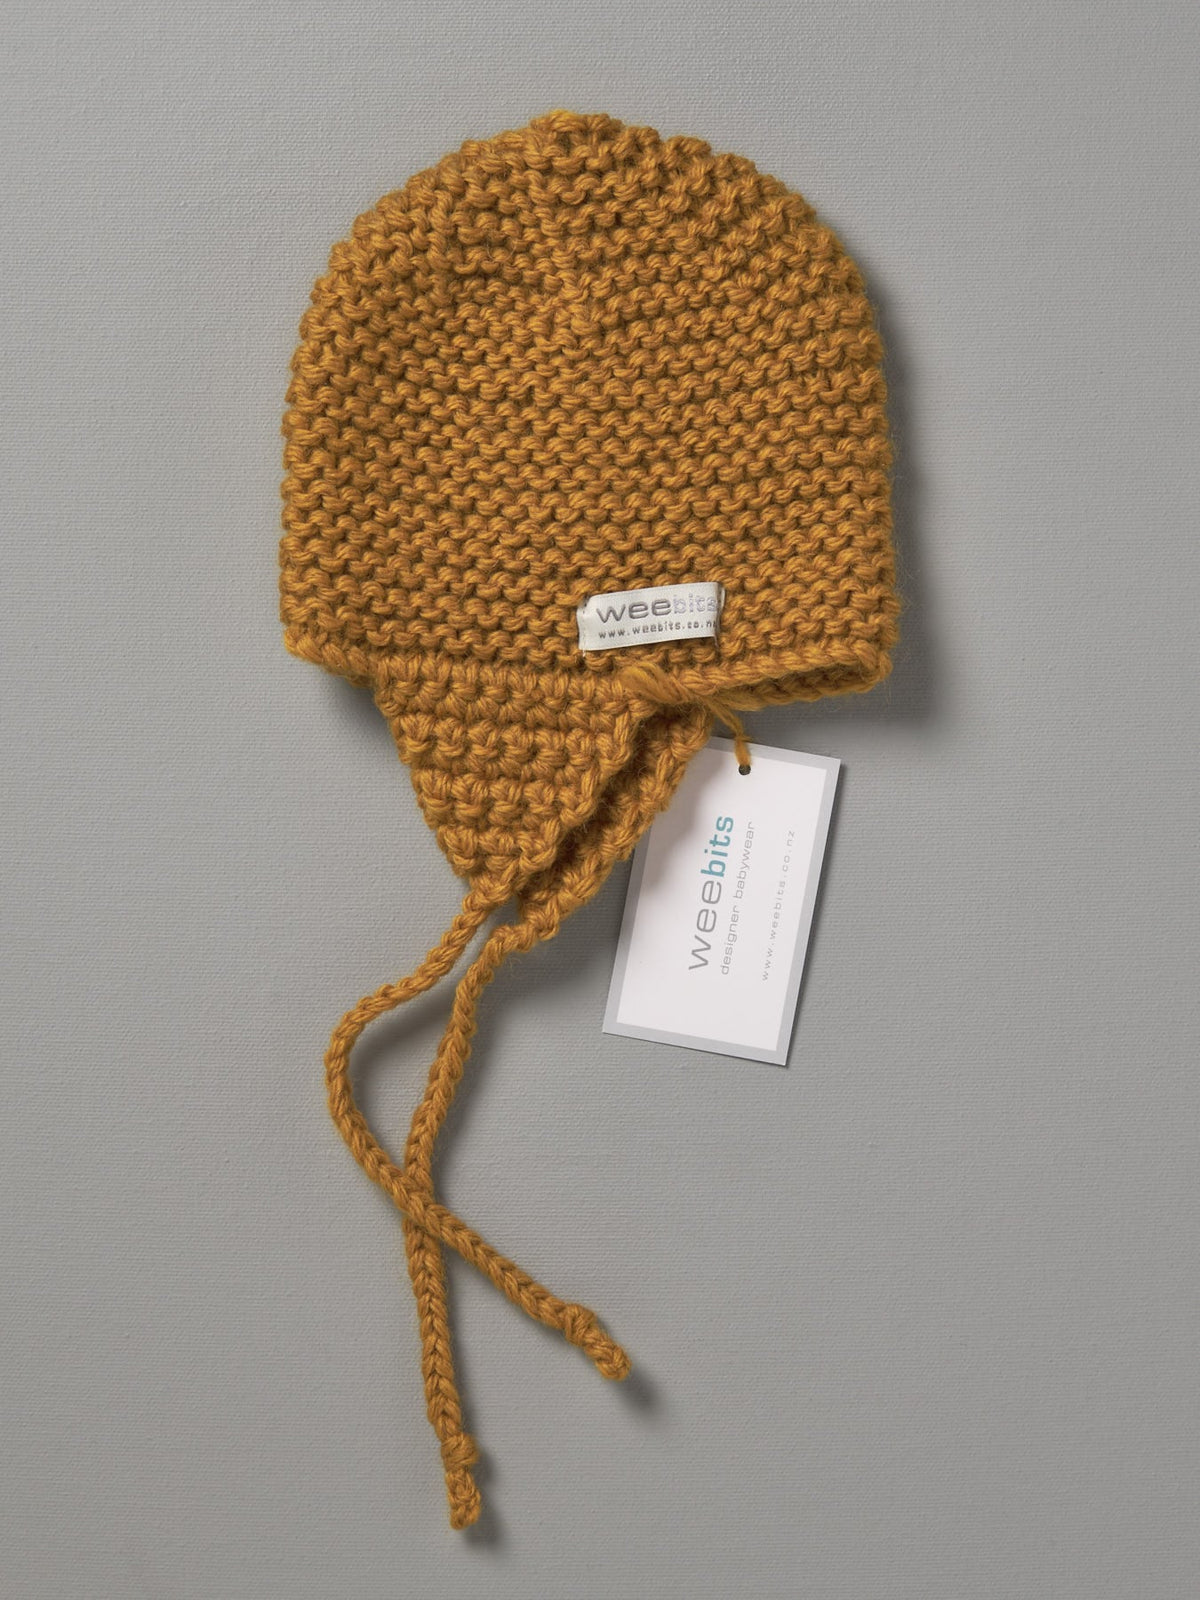 A Weebits Hand Knitted Chunky Knit Hat - Mustard with a tag on it.